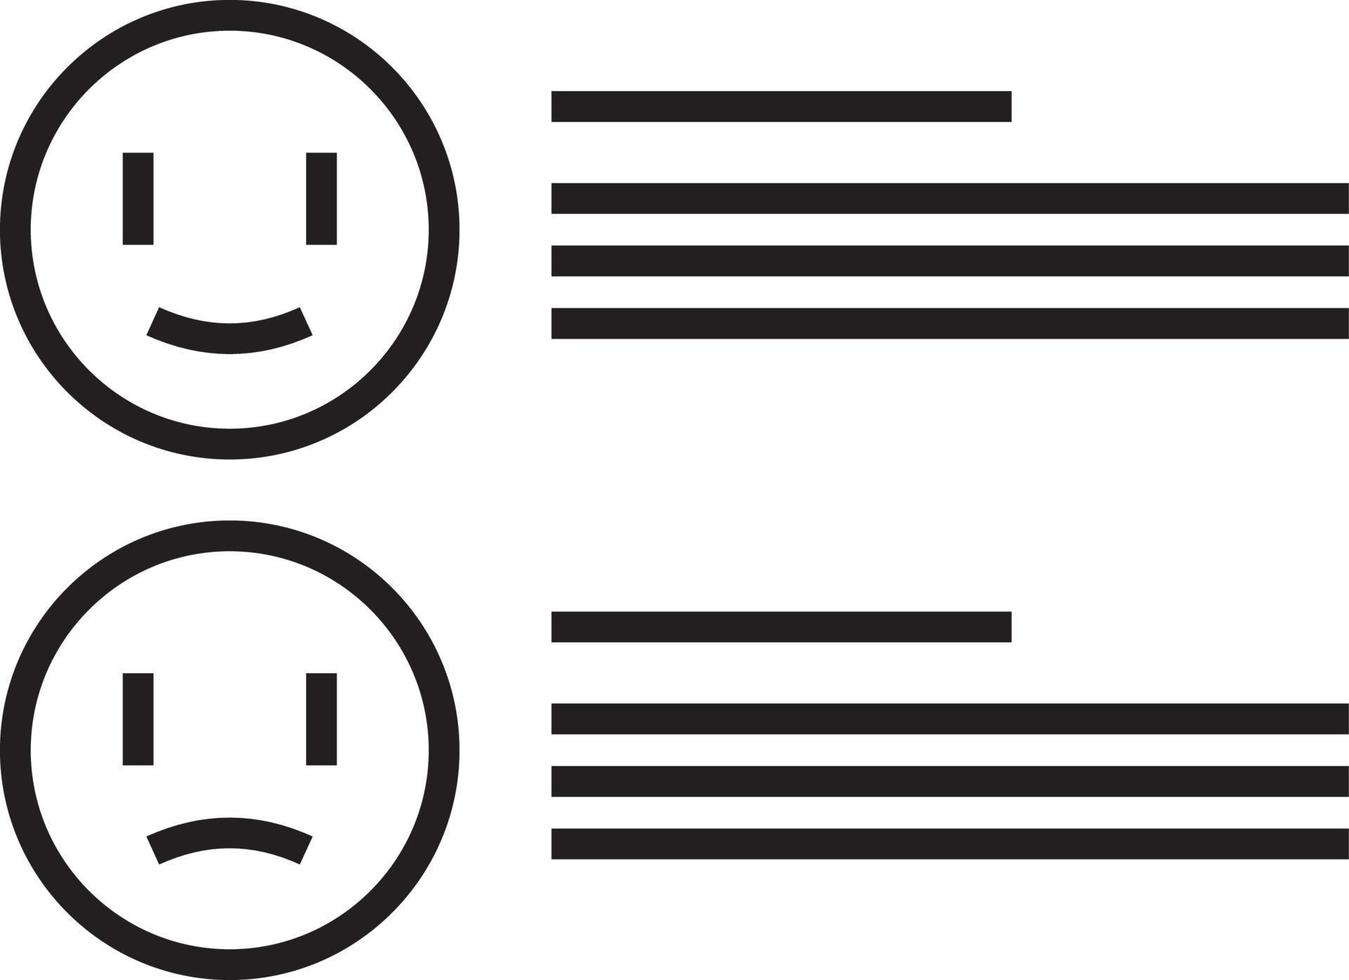 Satisfaction Feedback icon with black outline style vector